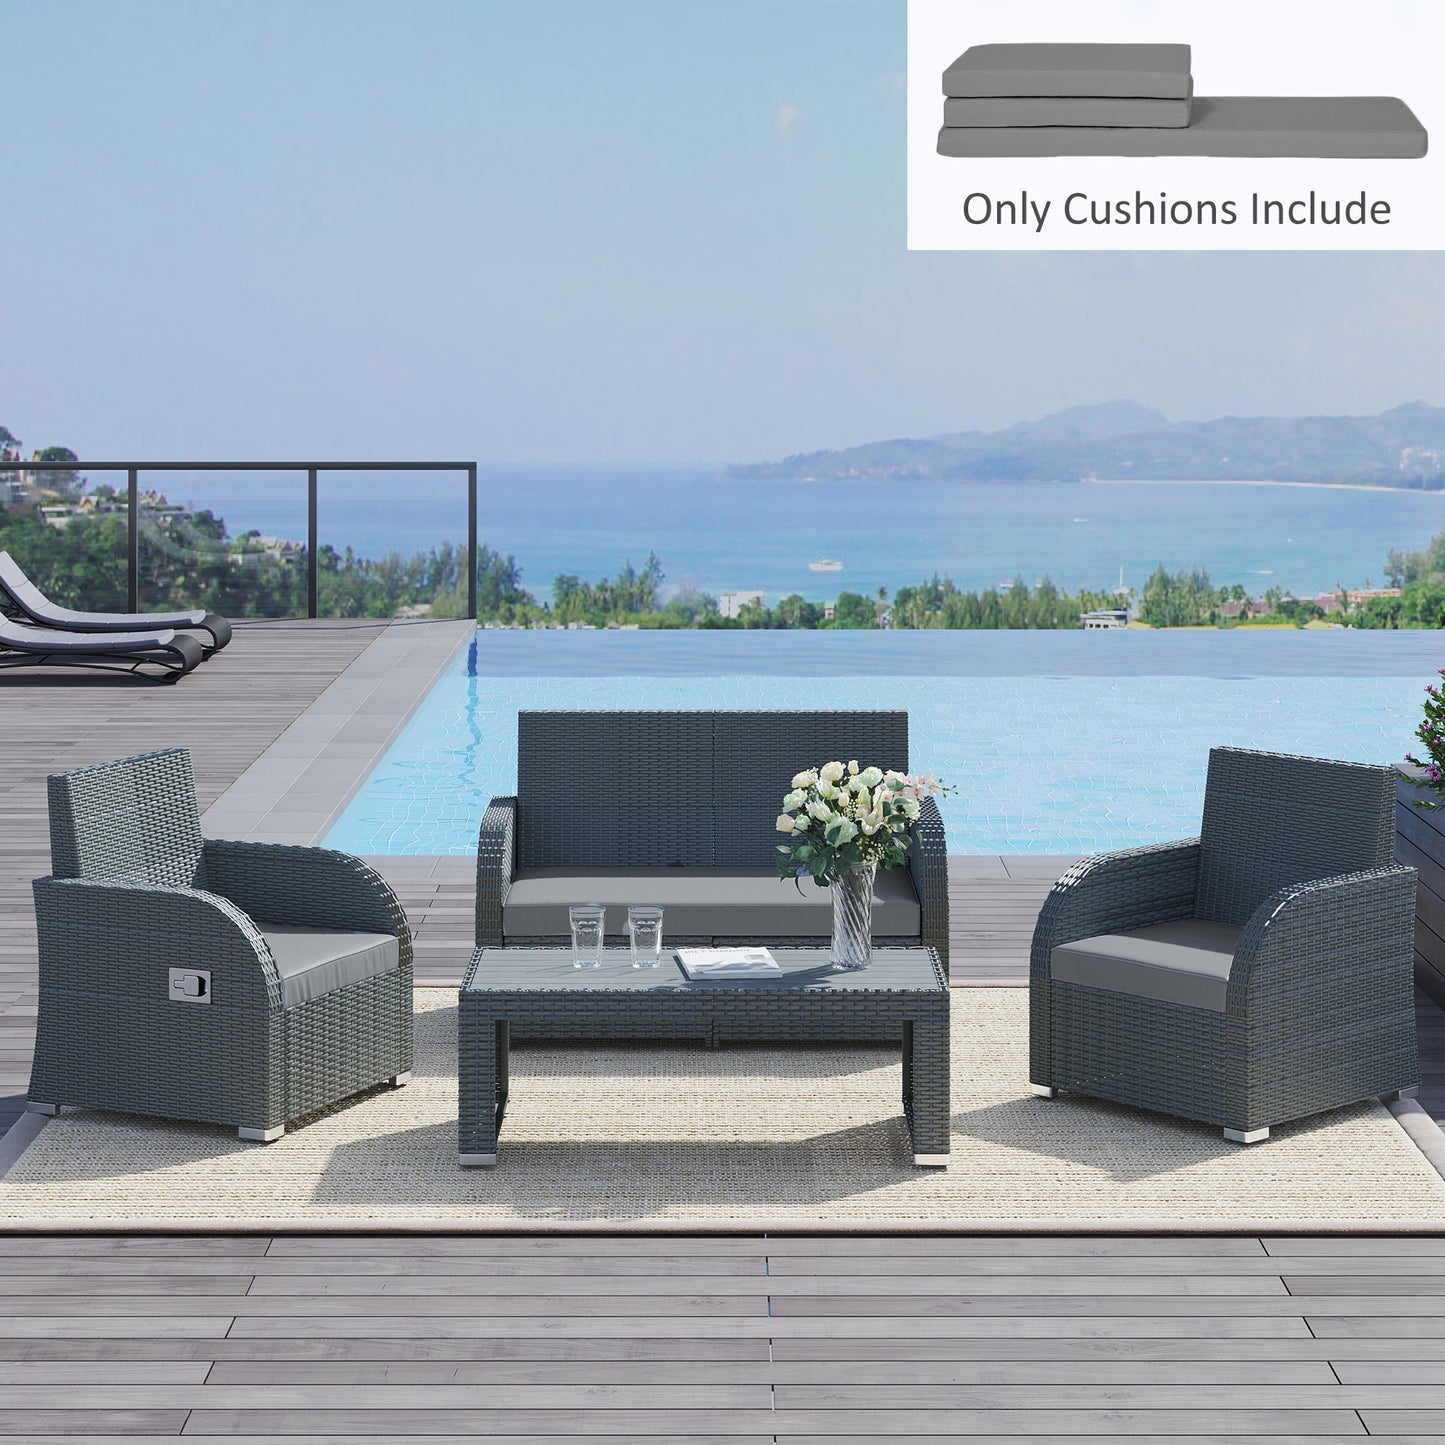 Outsunny Garden Seat Cushion Pads for Rattan Chairs, 3 Piece Patio Furniture Cushions, Dark Grey